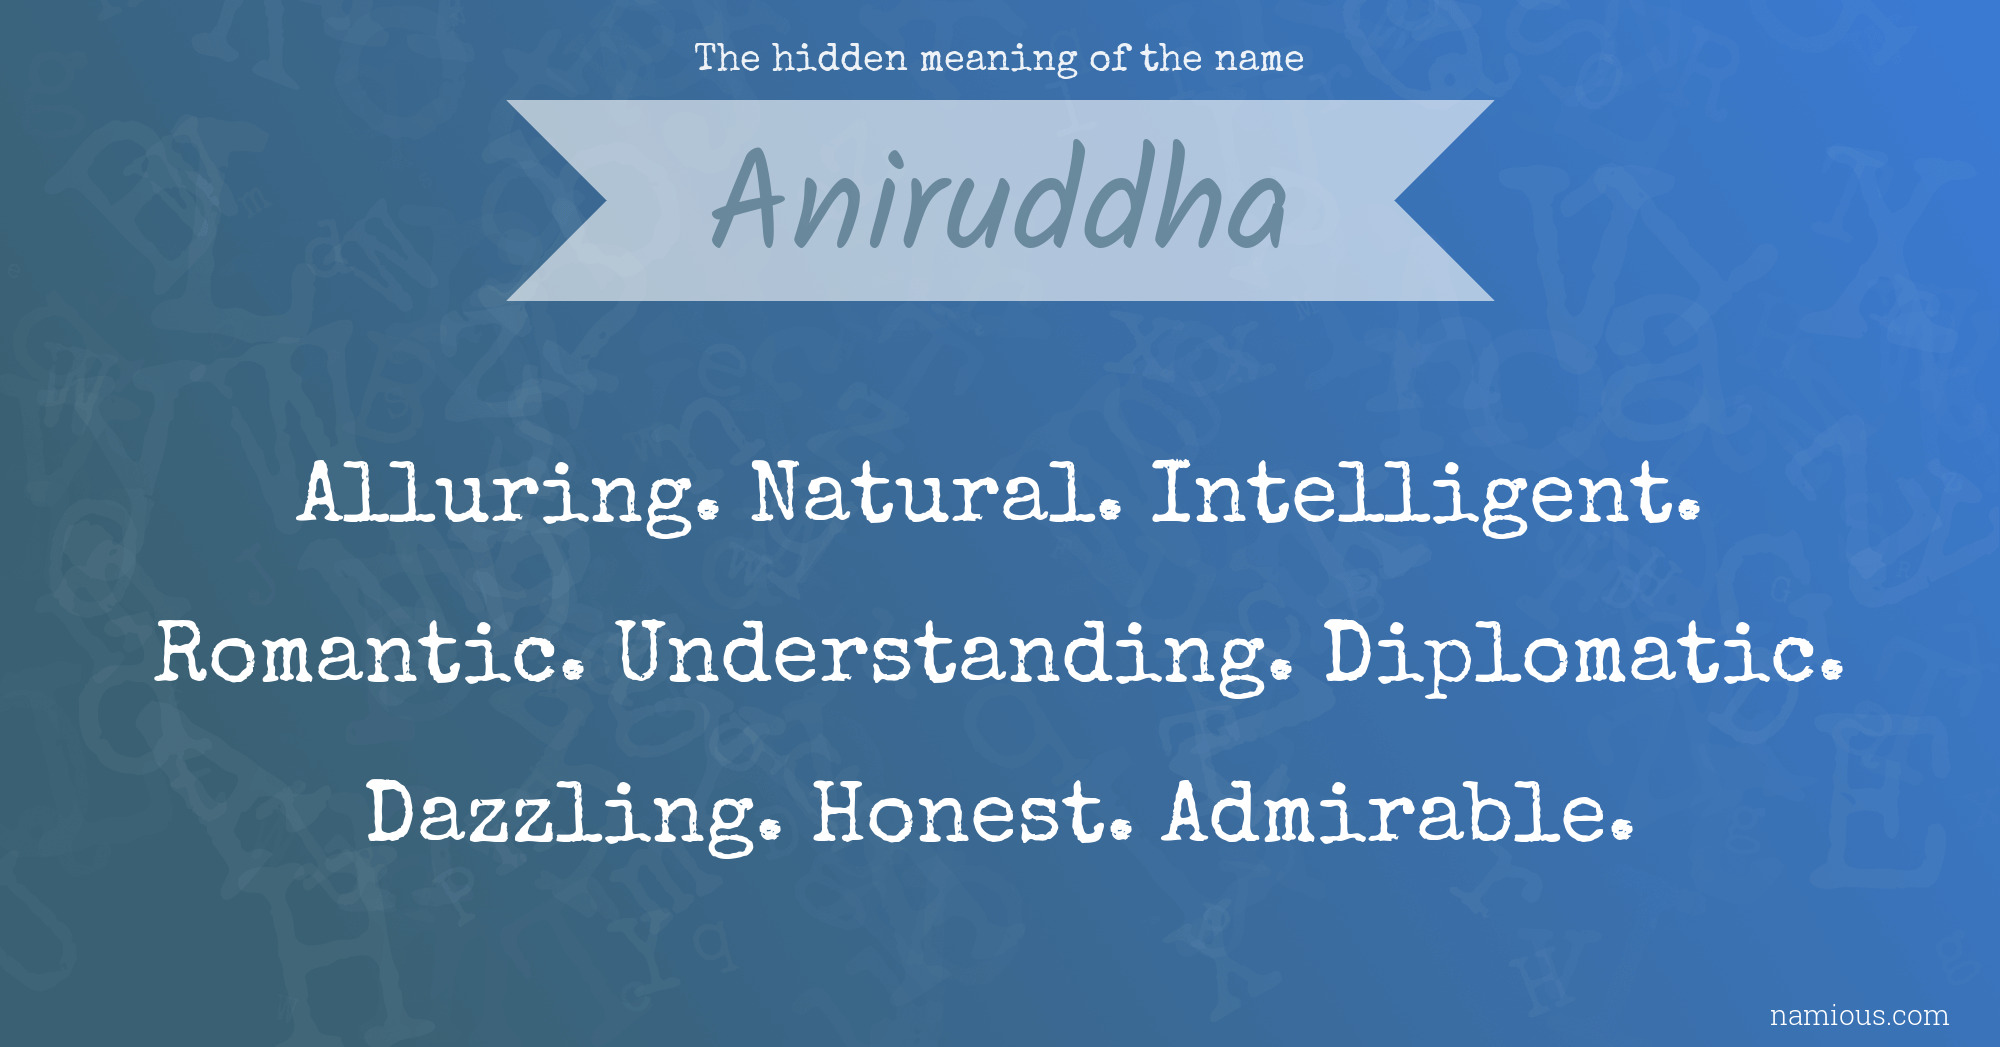 The hidden meaning of the name Aniruddha